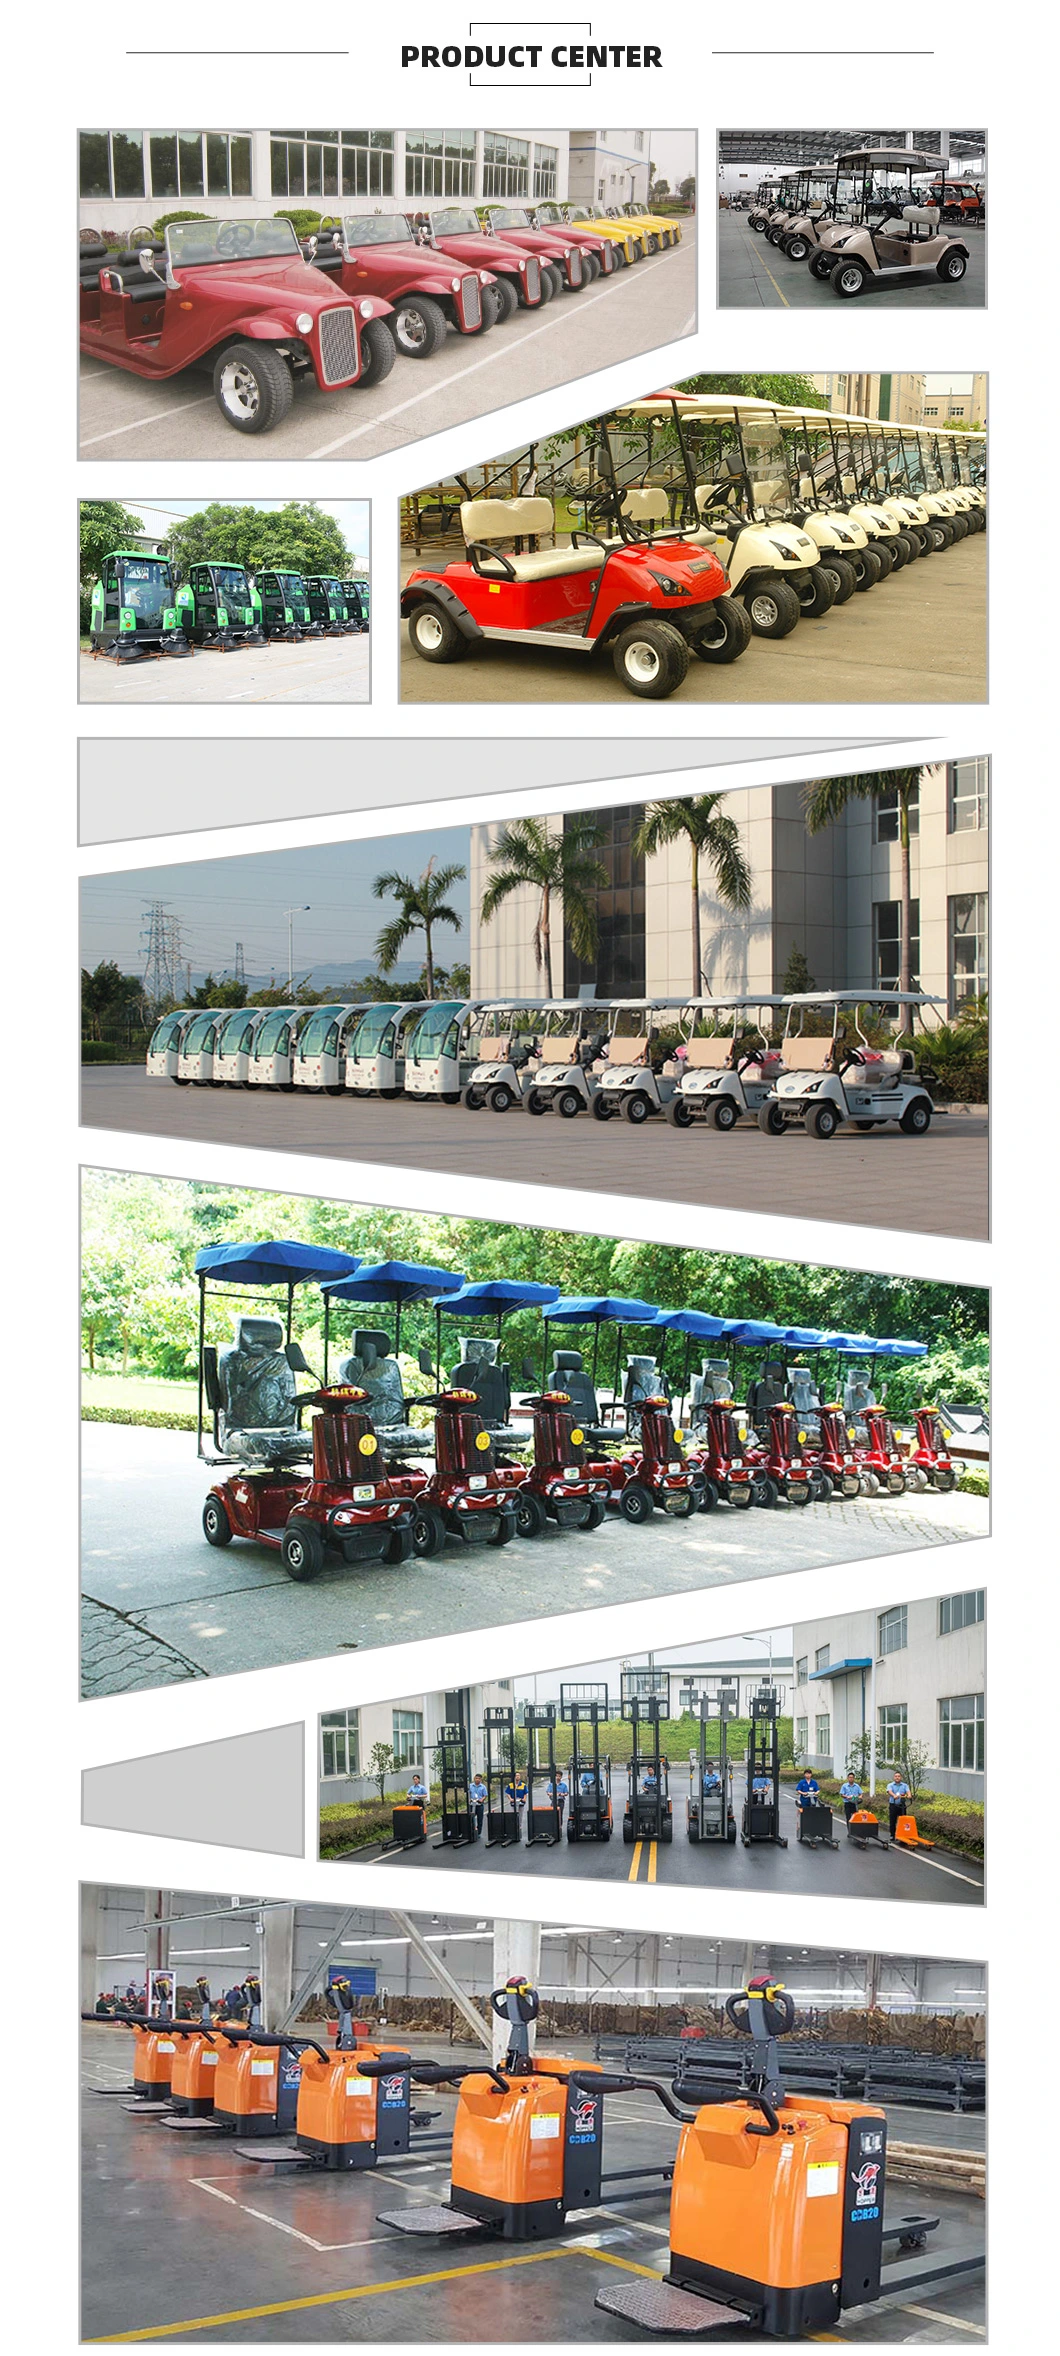 China Factory Battery Power 11 Seater Electric Shuttle Car (DN-11)